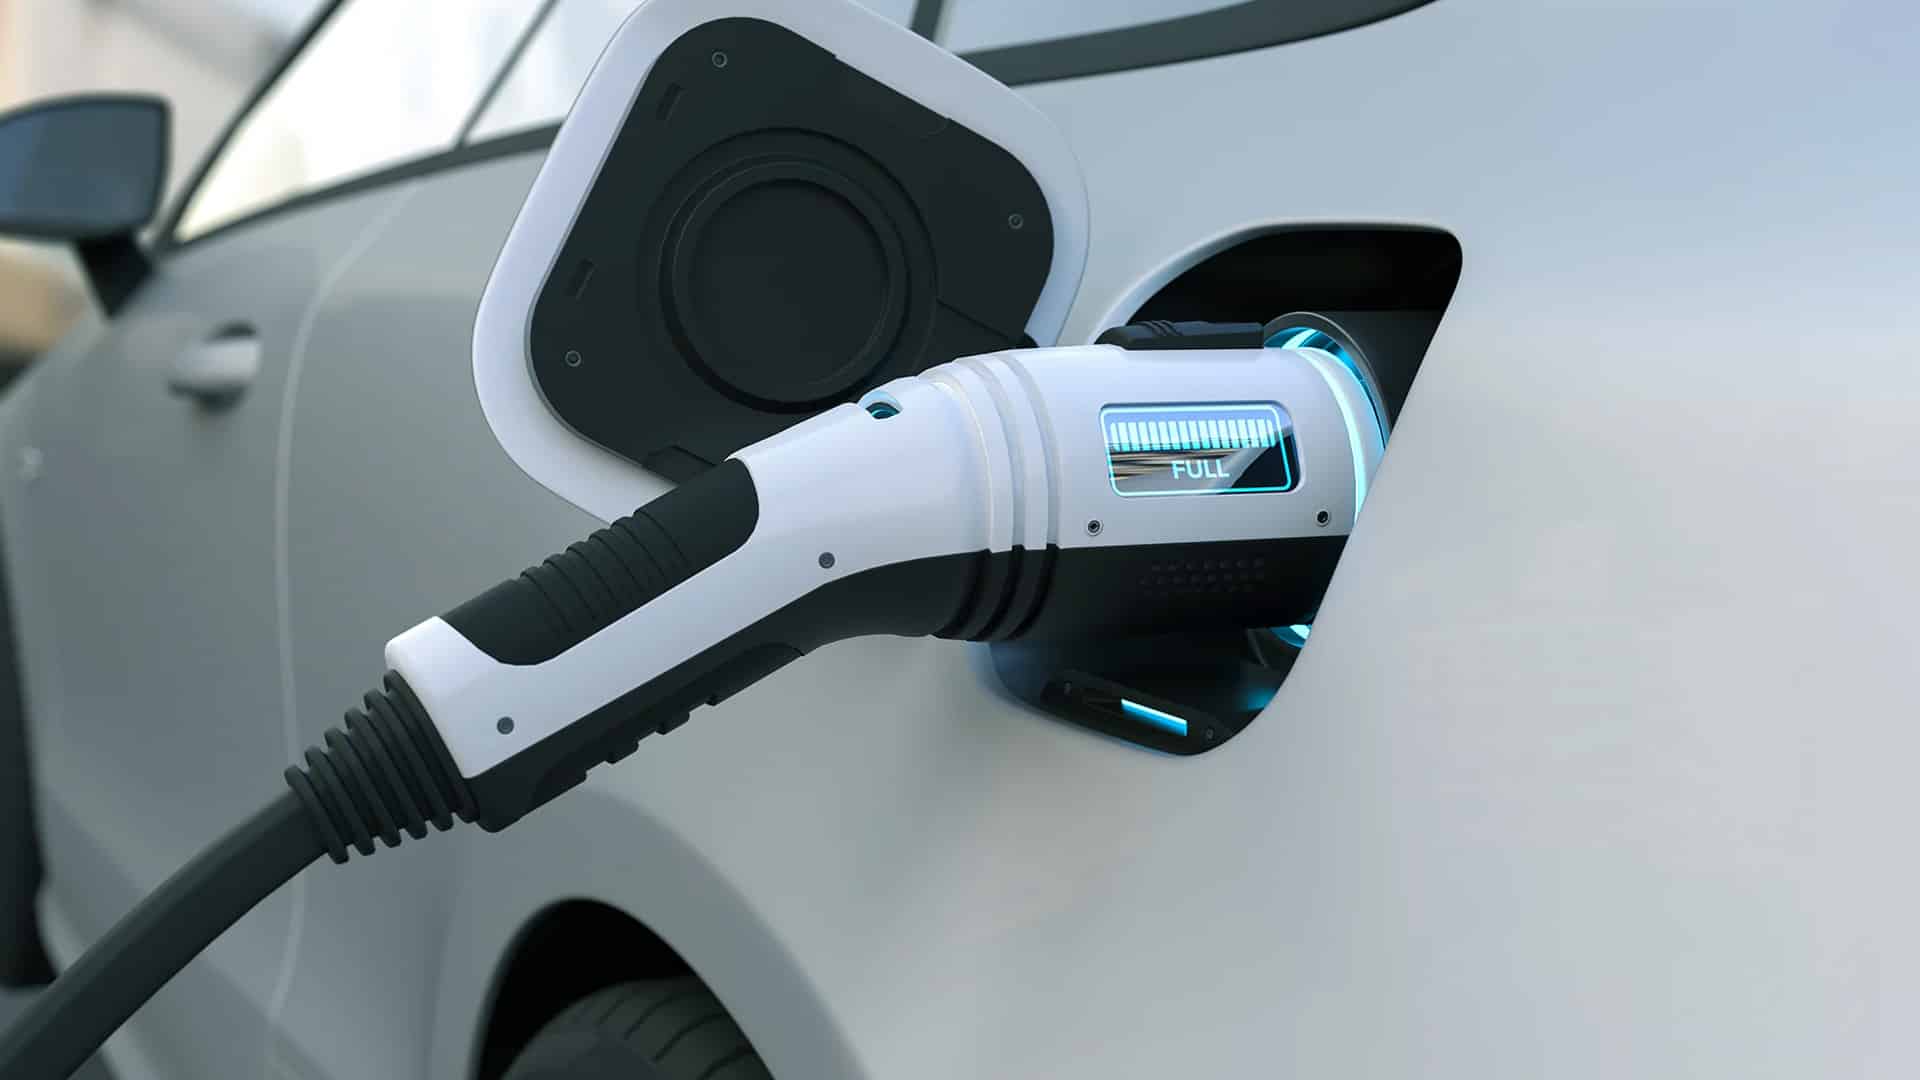 BPCL to invest Rs 200 cr to set up 100 fast EV charging corridors with 2,000 stations